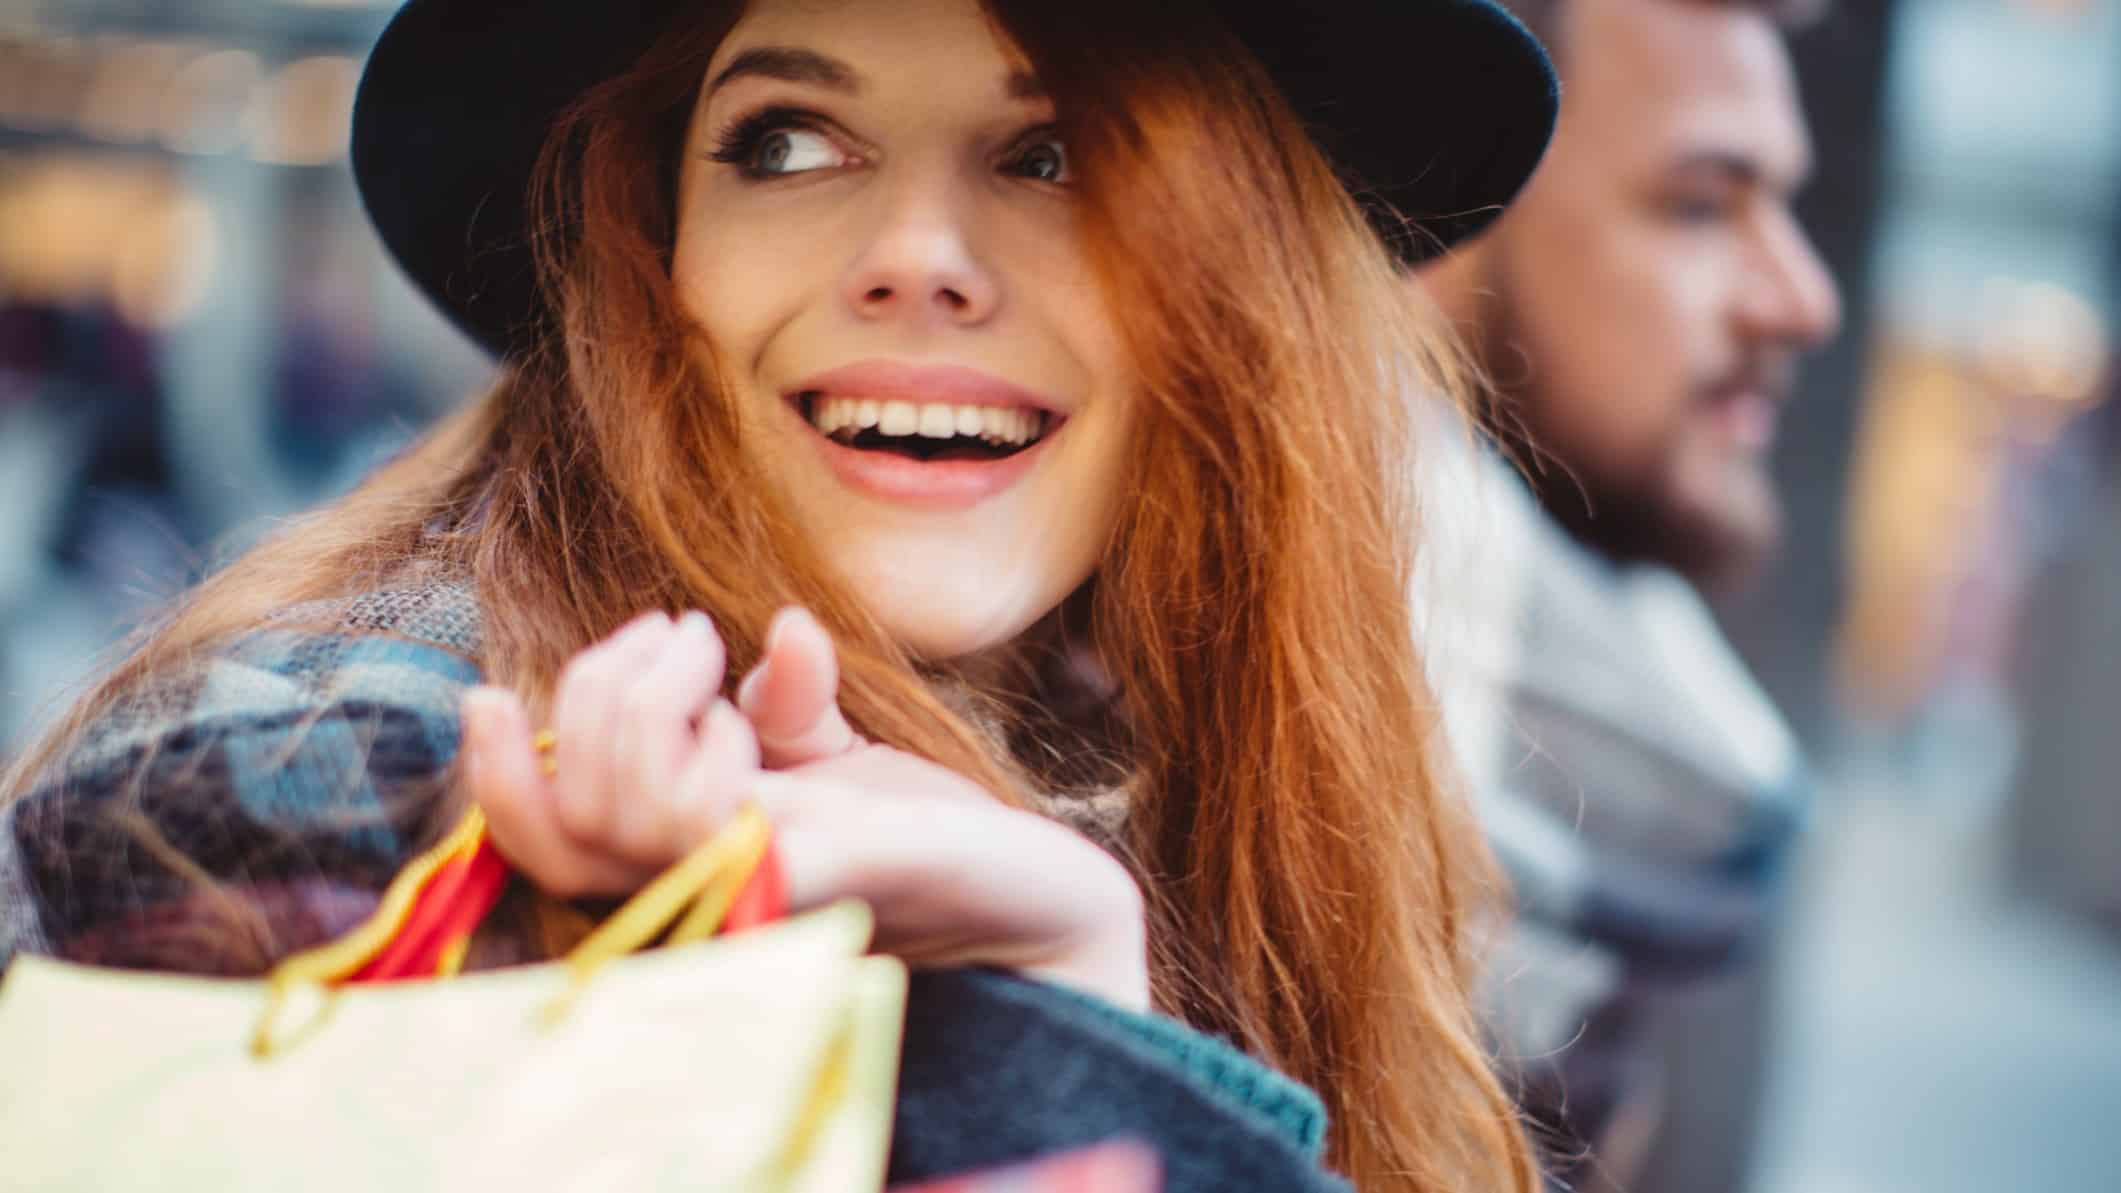 Close-up of a woman waring a hay and smiling as she carries shopping bags over her shoulder.